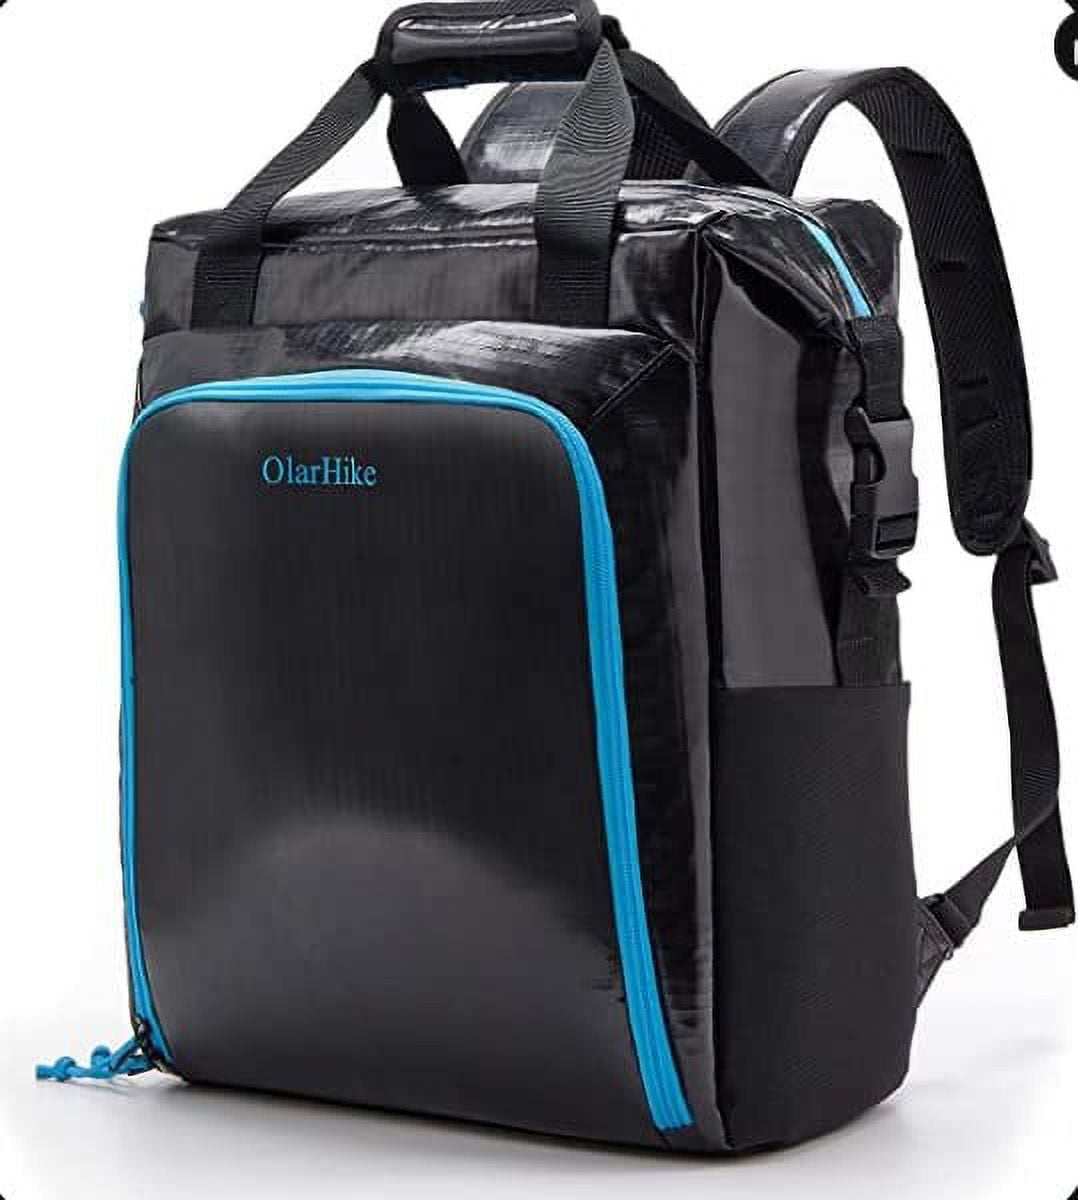  Corkcicle EOLA Soft Cooler Backpack, Black, Waterproof and Leak  Proof Insulated Bag, Perfect for Wine, Beer, and Ice Packs, Camping Cooler,  Hiking Cooler, Beach Cooler : Home & Kitchen